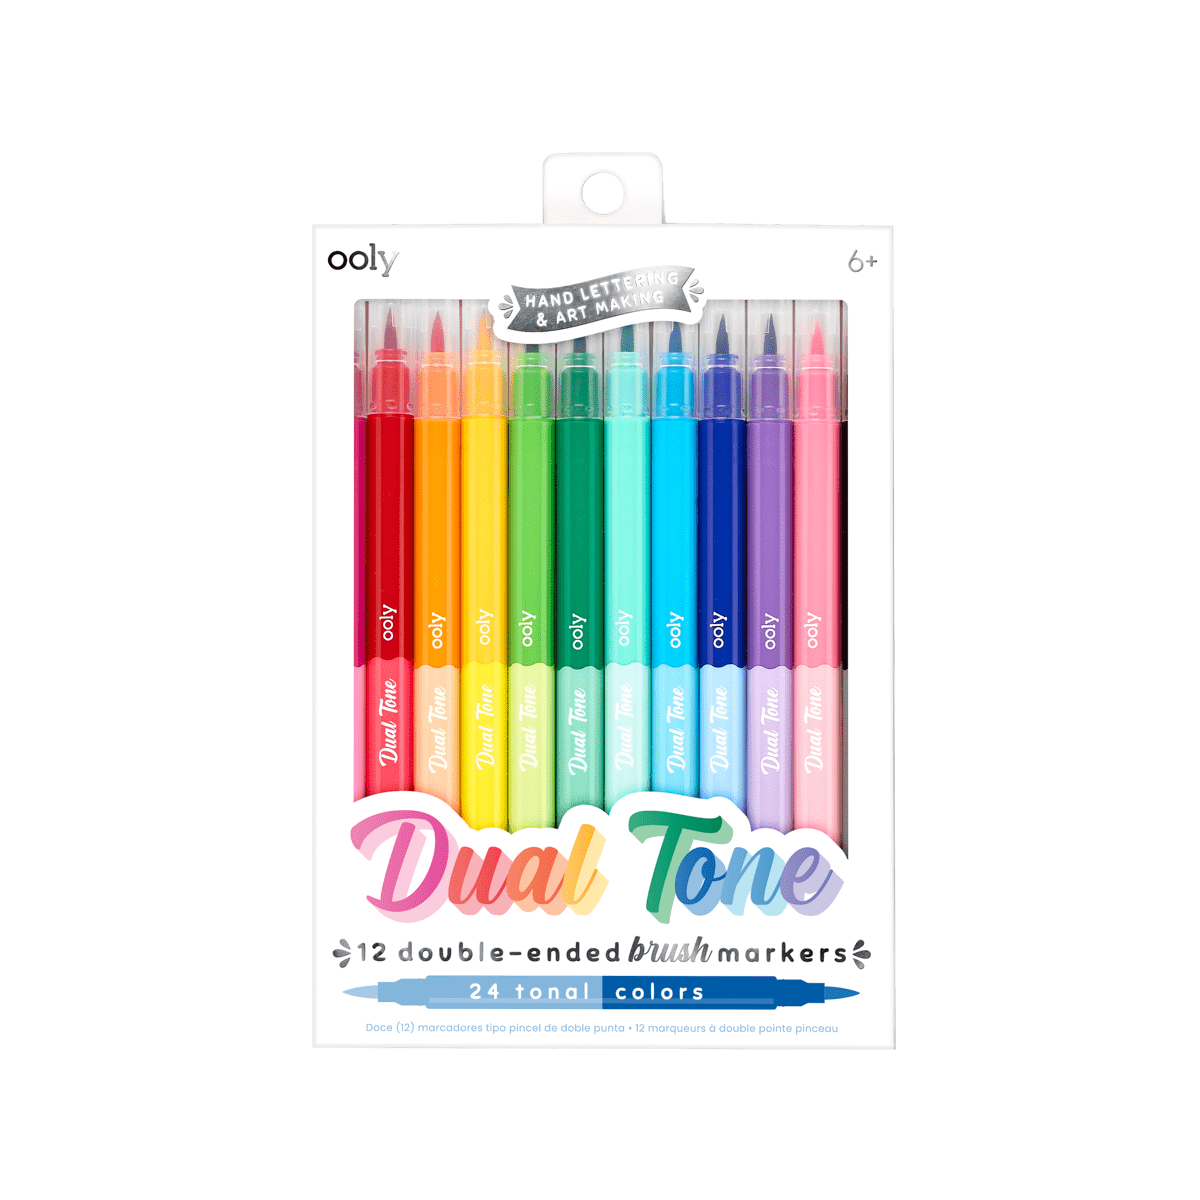 Pastel Liners Markers Set of 8 - Tip Toes